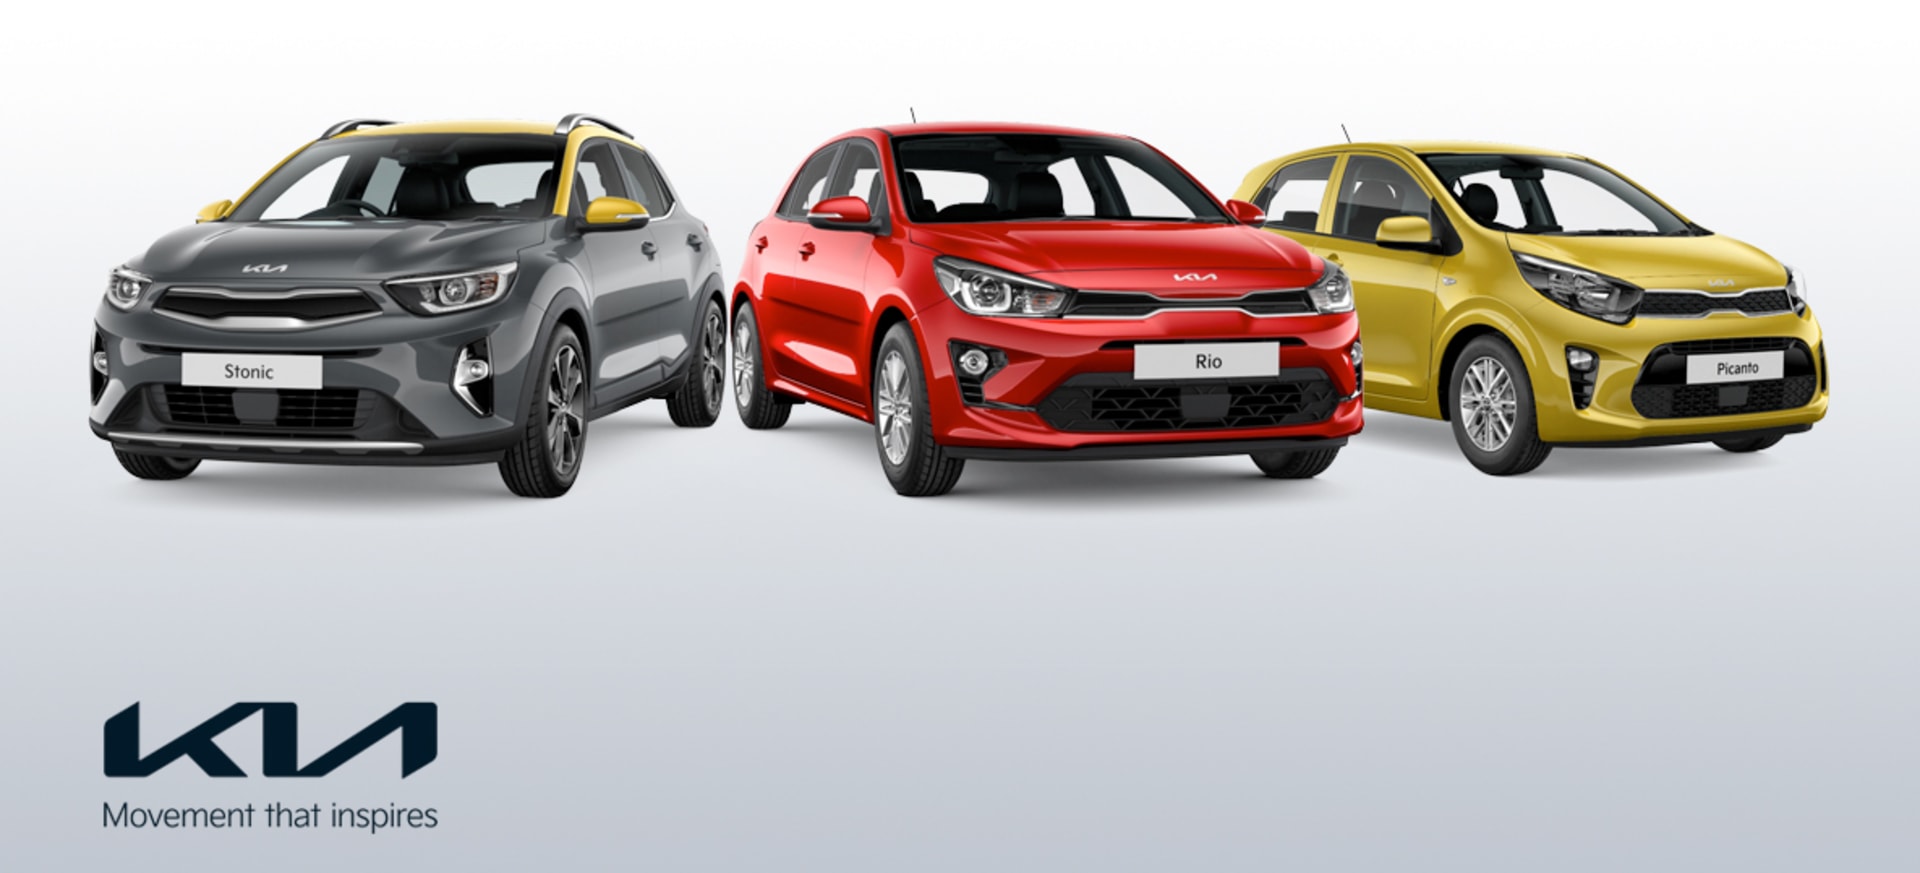 Beat the waiting lists at Park’s Kia.